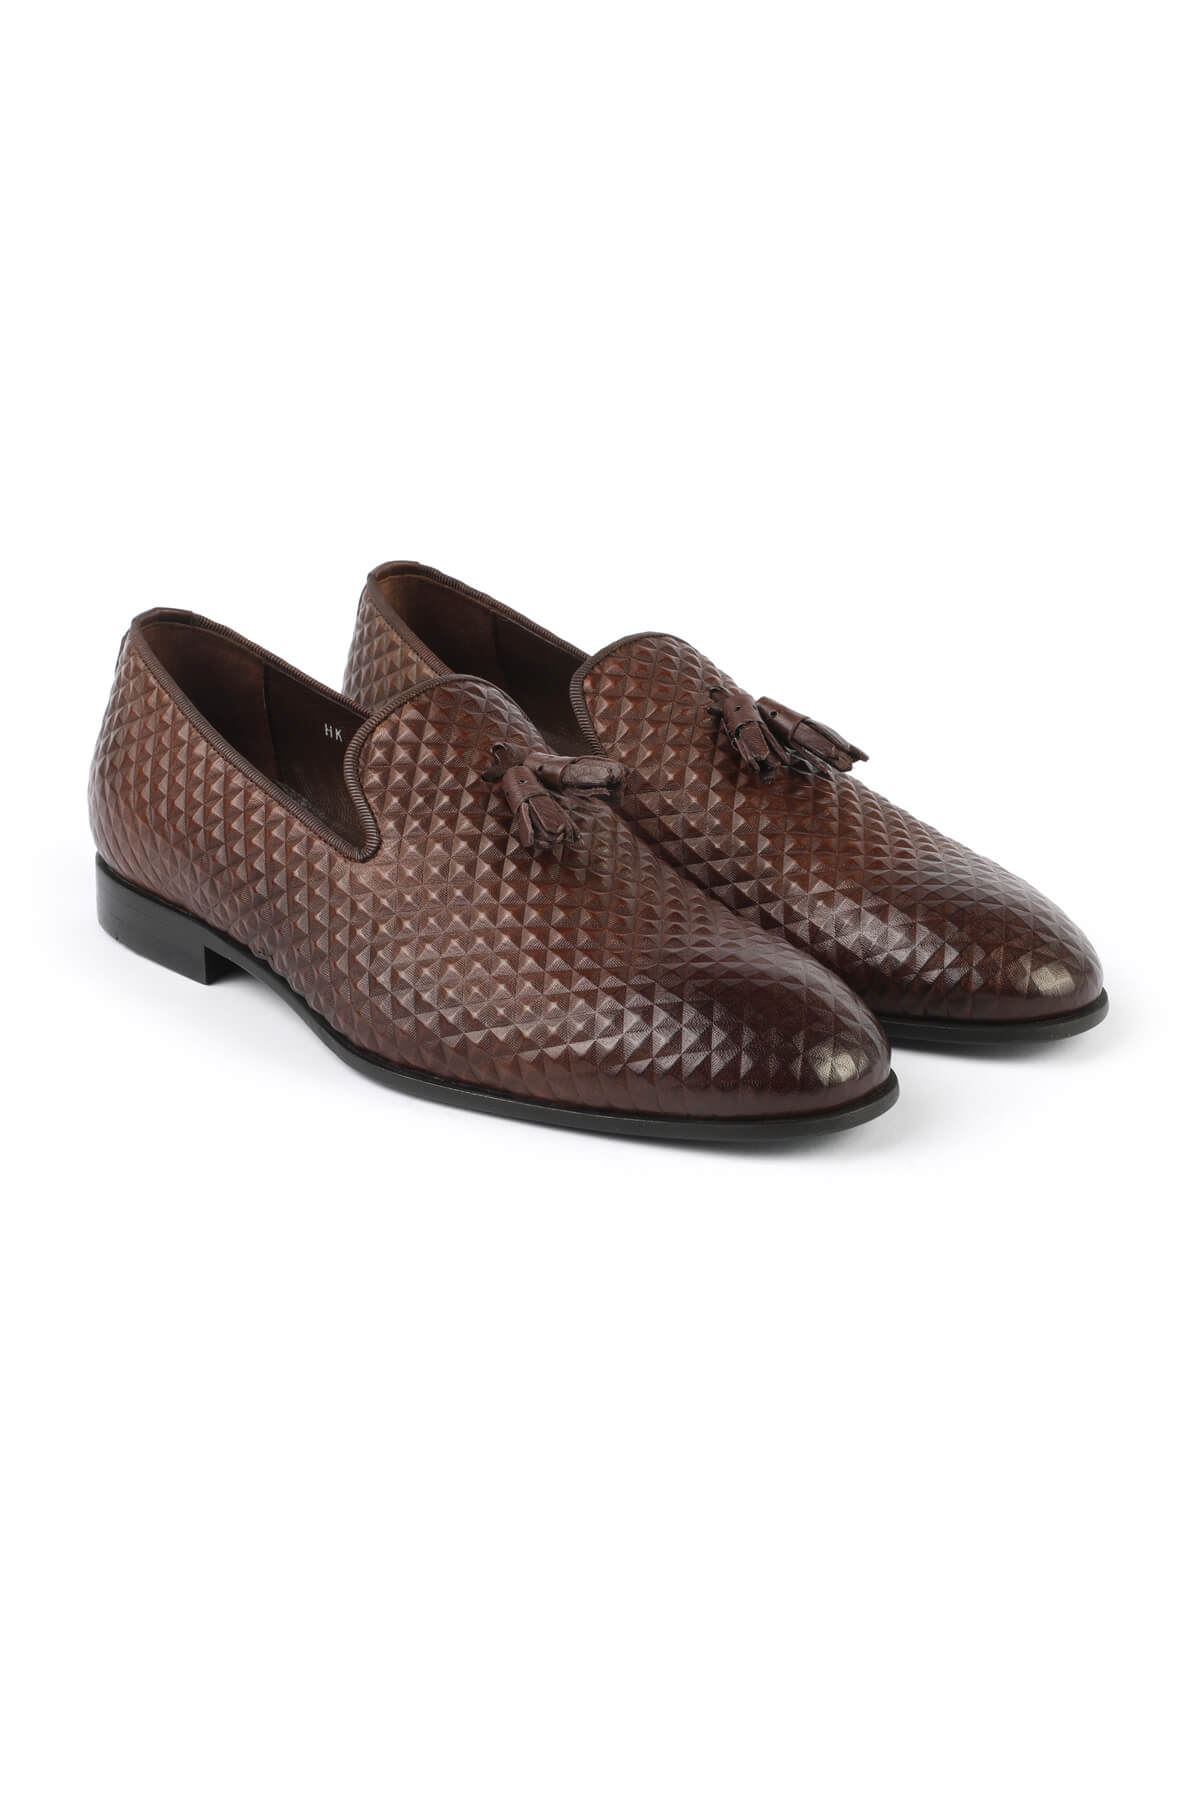 Libero 2830 Brown Loafer Shoes